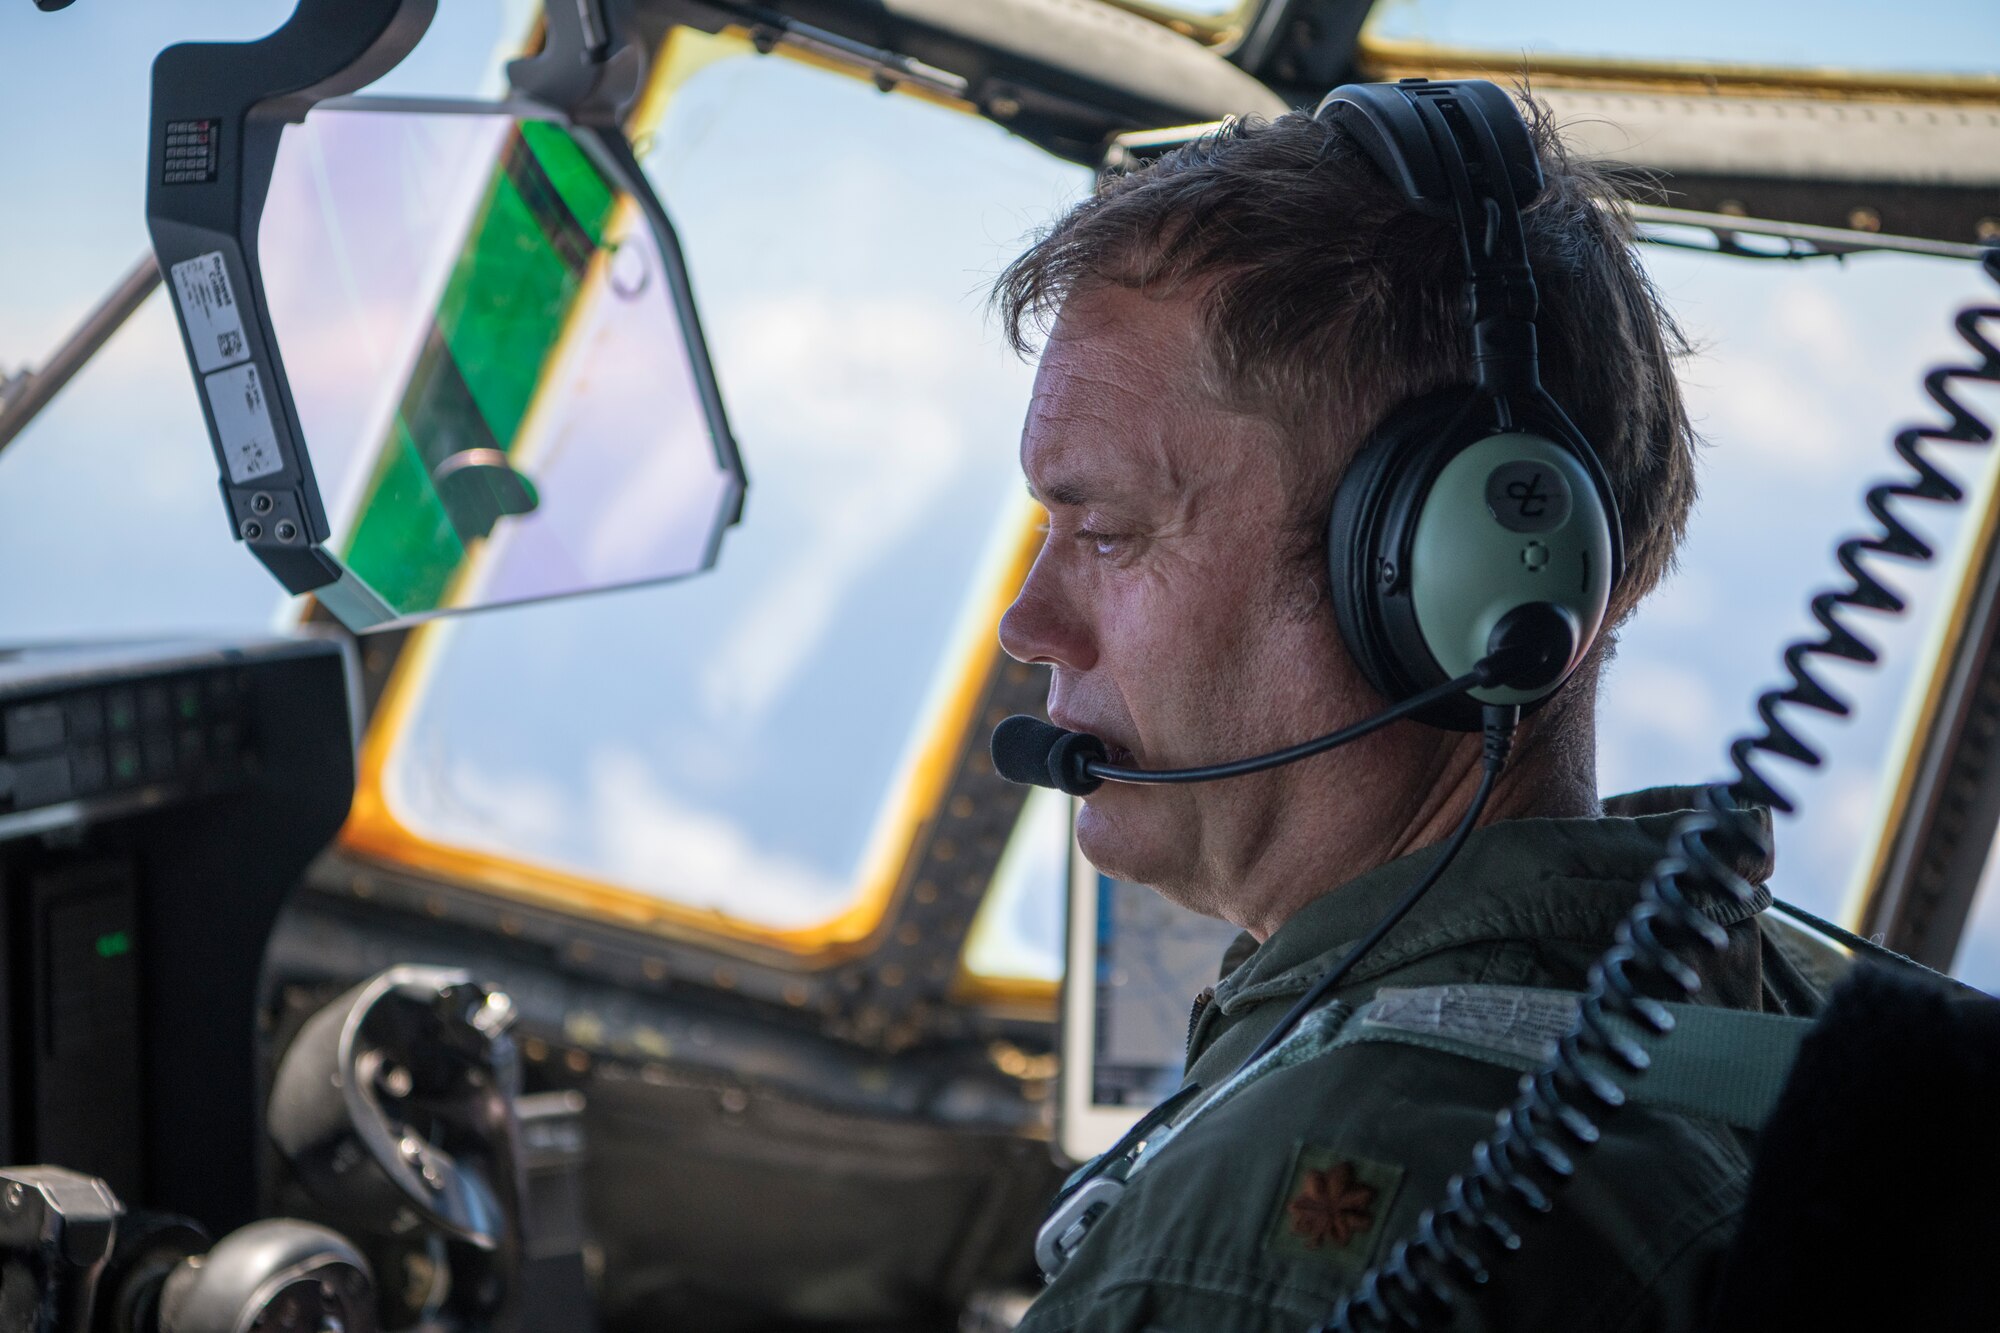 Maj. Eric Chapman, 53rd Weather Reconnaissance Squadron pilot, monitors the aircraft instruments of a WC-130J Super Hercules aircraft, June 17, over the Caribbean. The Hurricane Hunters deployed to St. Croix to fly training missions over the Caribbean in preparation for the 2020 hurricane season. (U.S. Air Force photo by Tech. Sgt. Christopher Carranza)